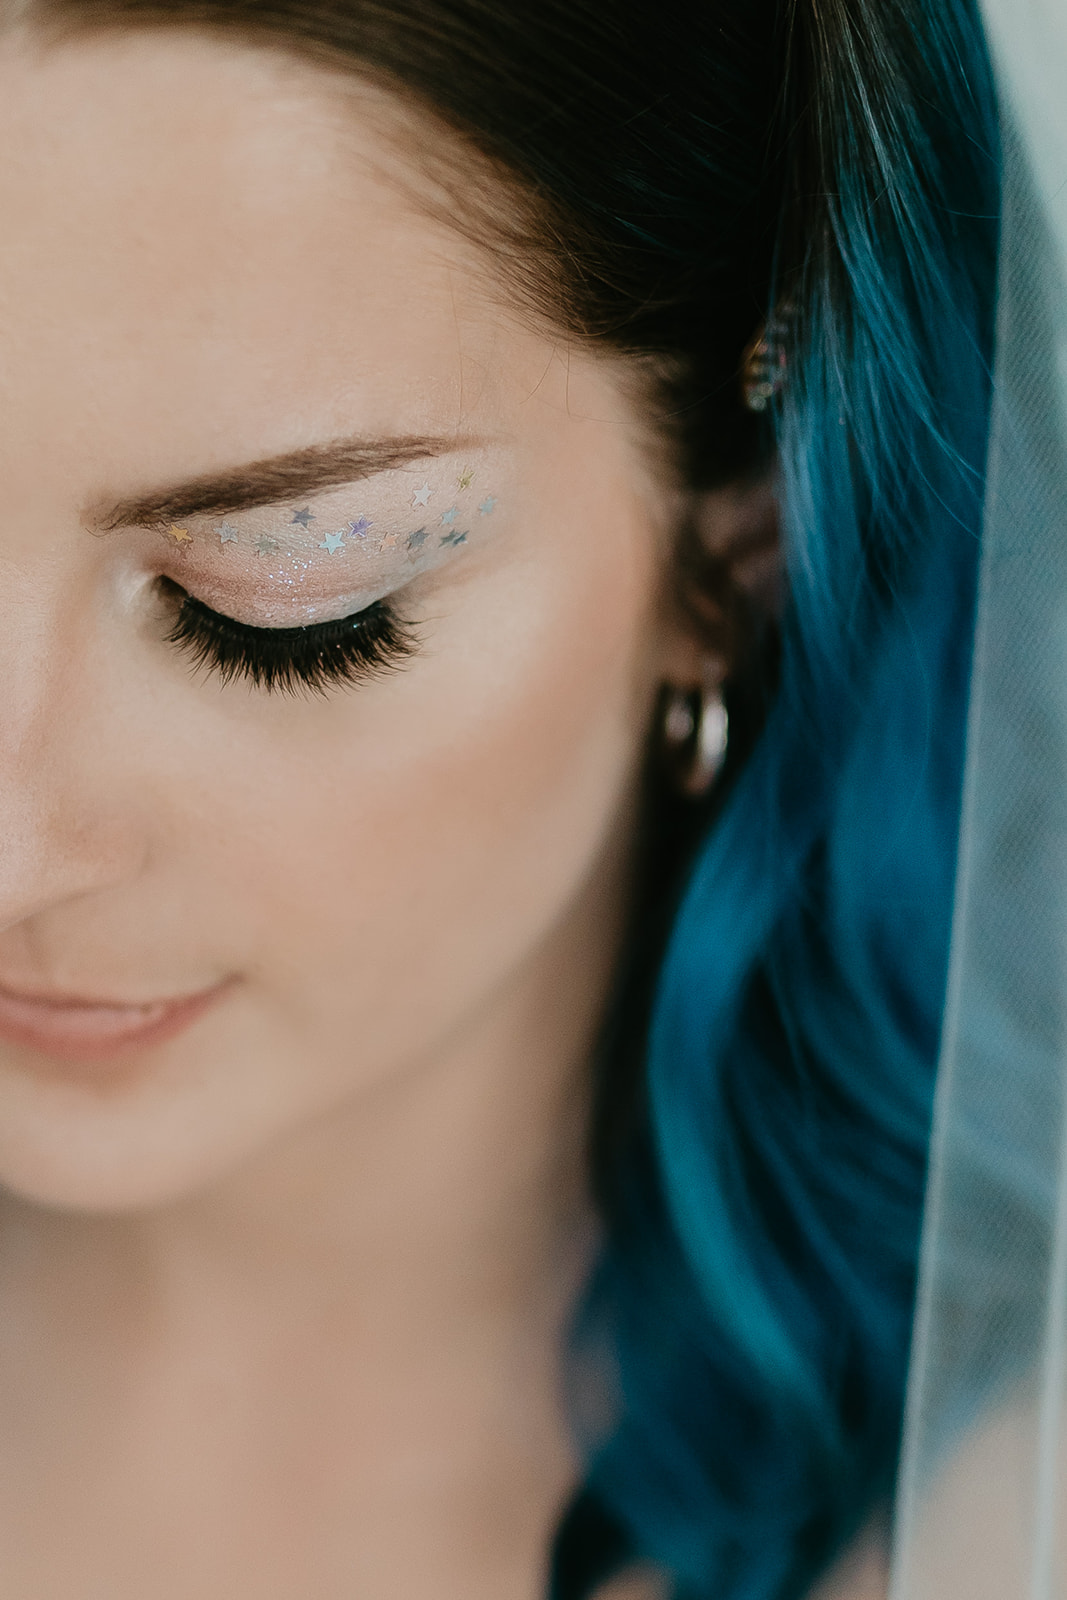 Rocker chic blue haired bridal inspiration for your wedding day